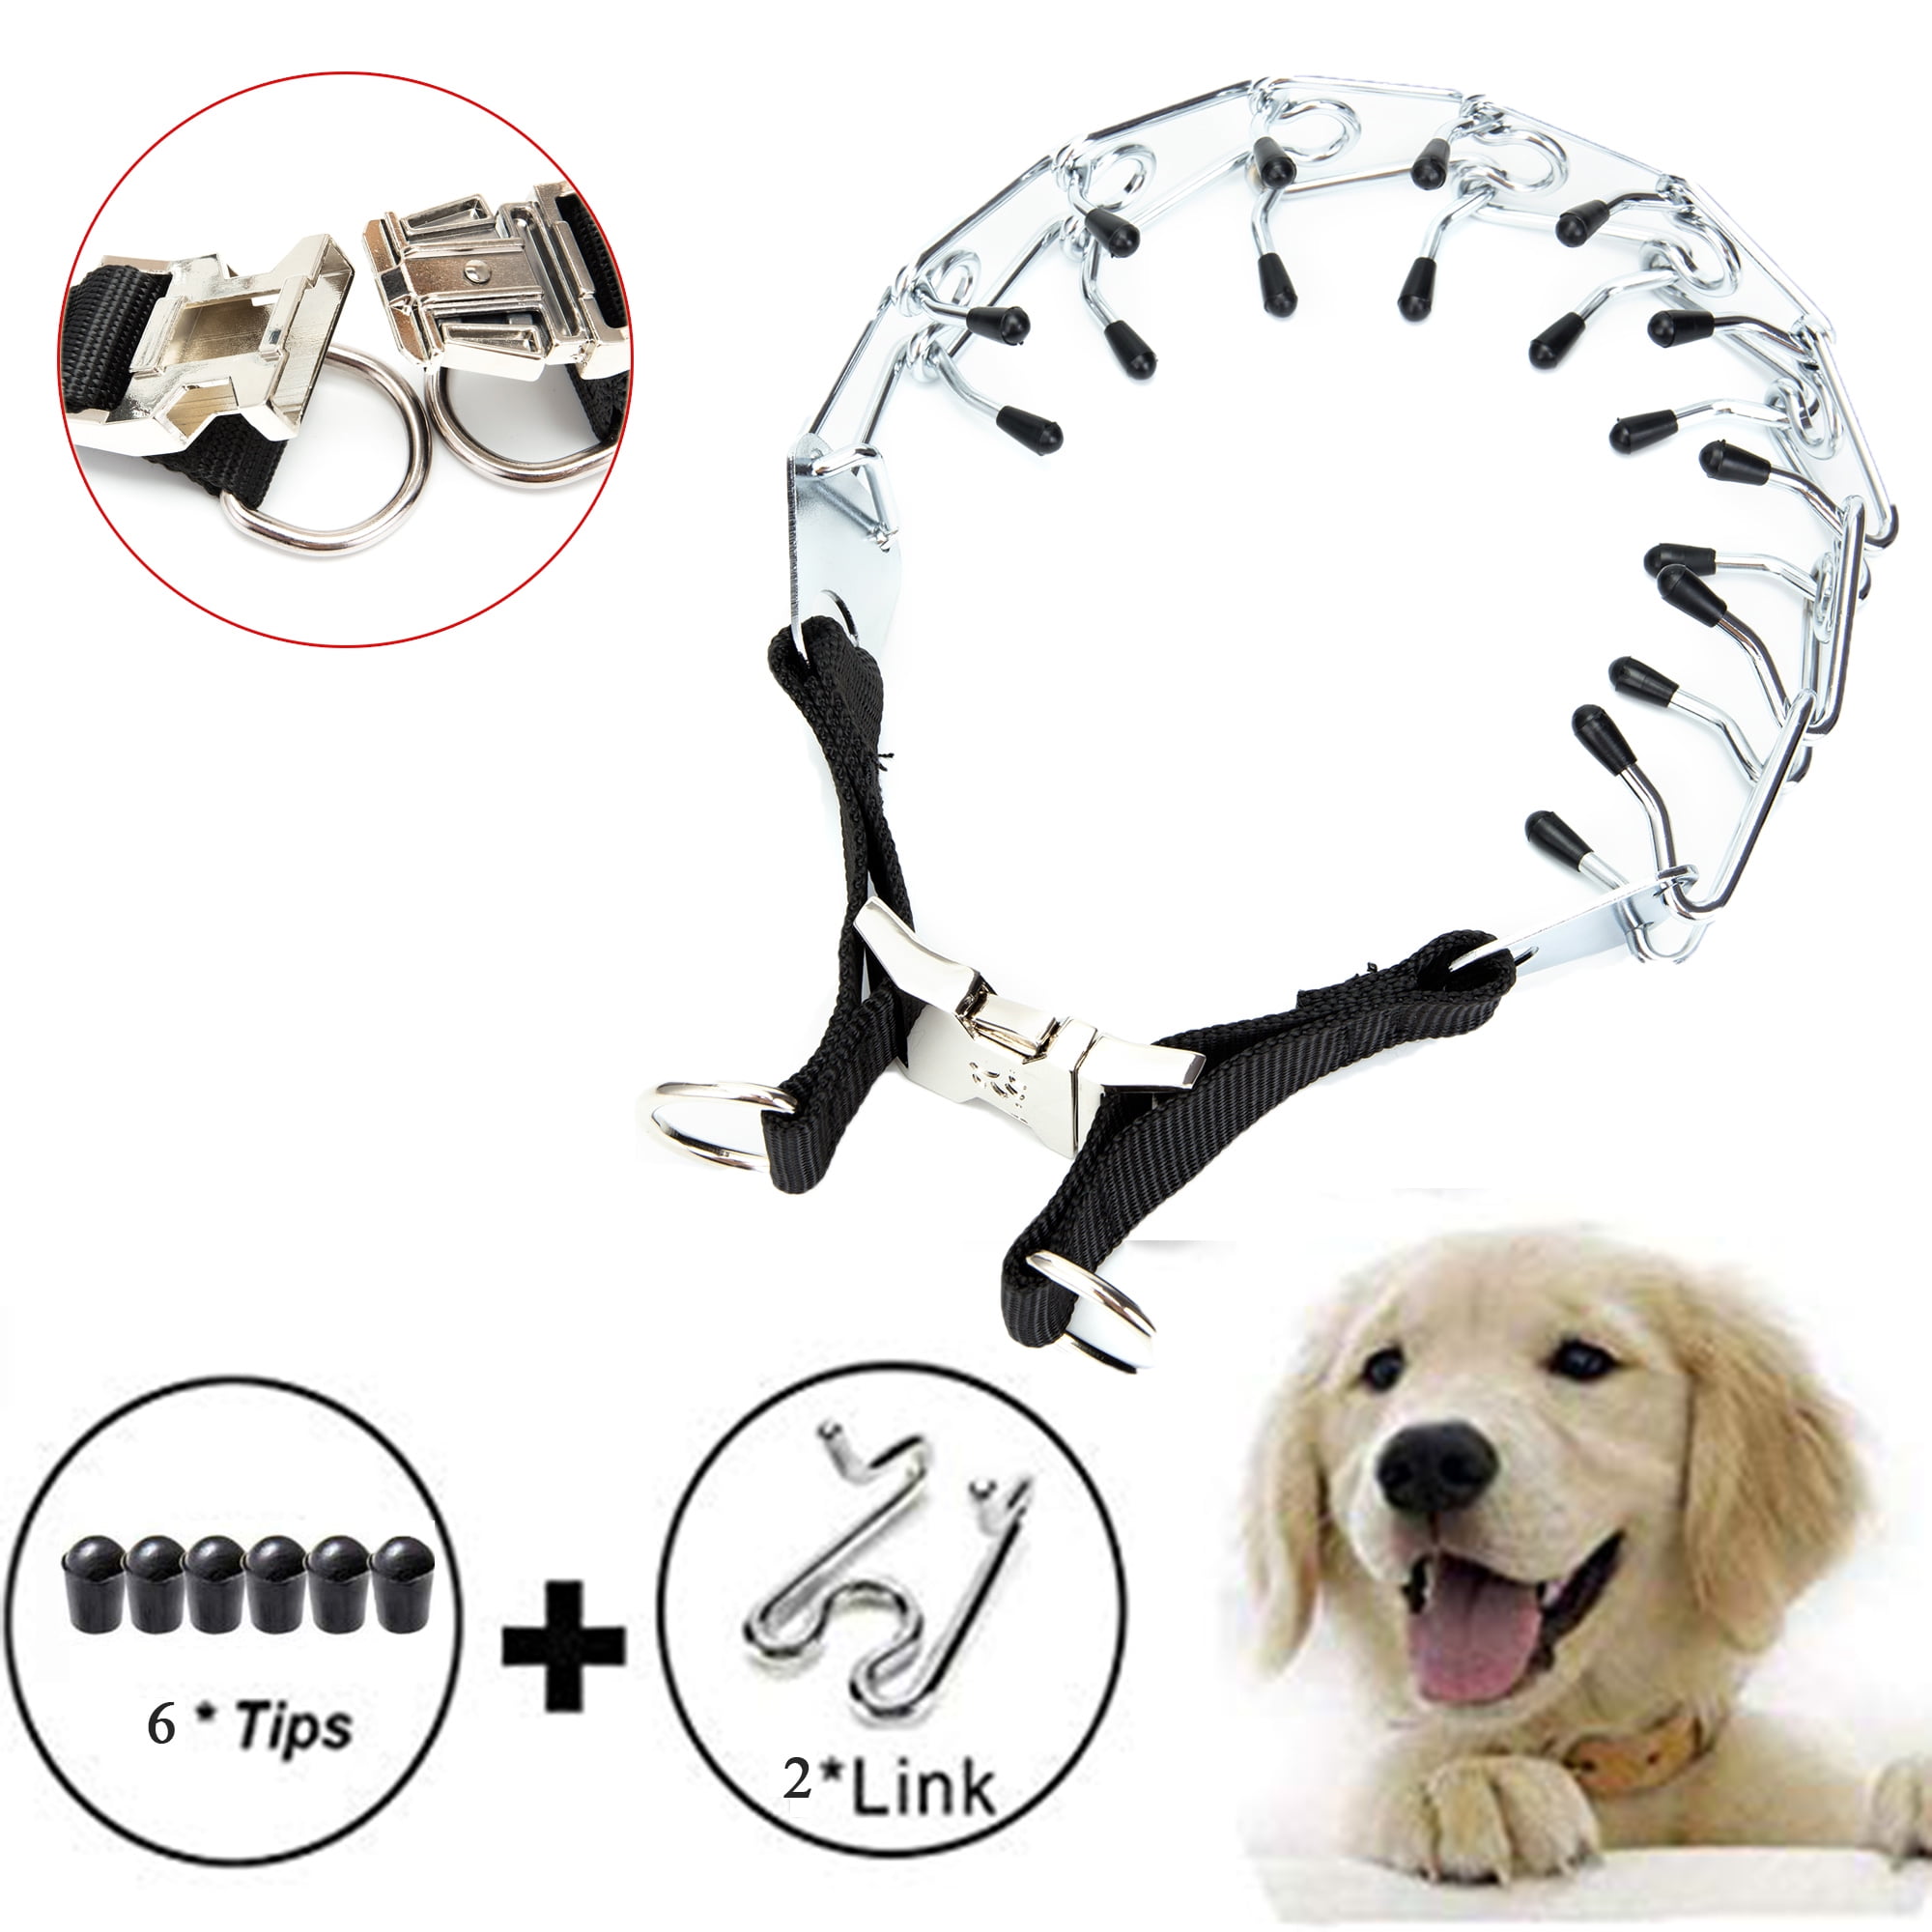 Medium Dogs and Small Dogs Stainless Steel Adjustable with Comfort Rubber Tips Aheasoun Dog Prong Training Collar Safe and Effective for Large Dogs 